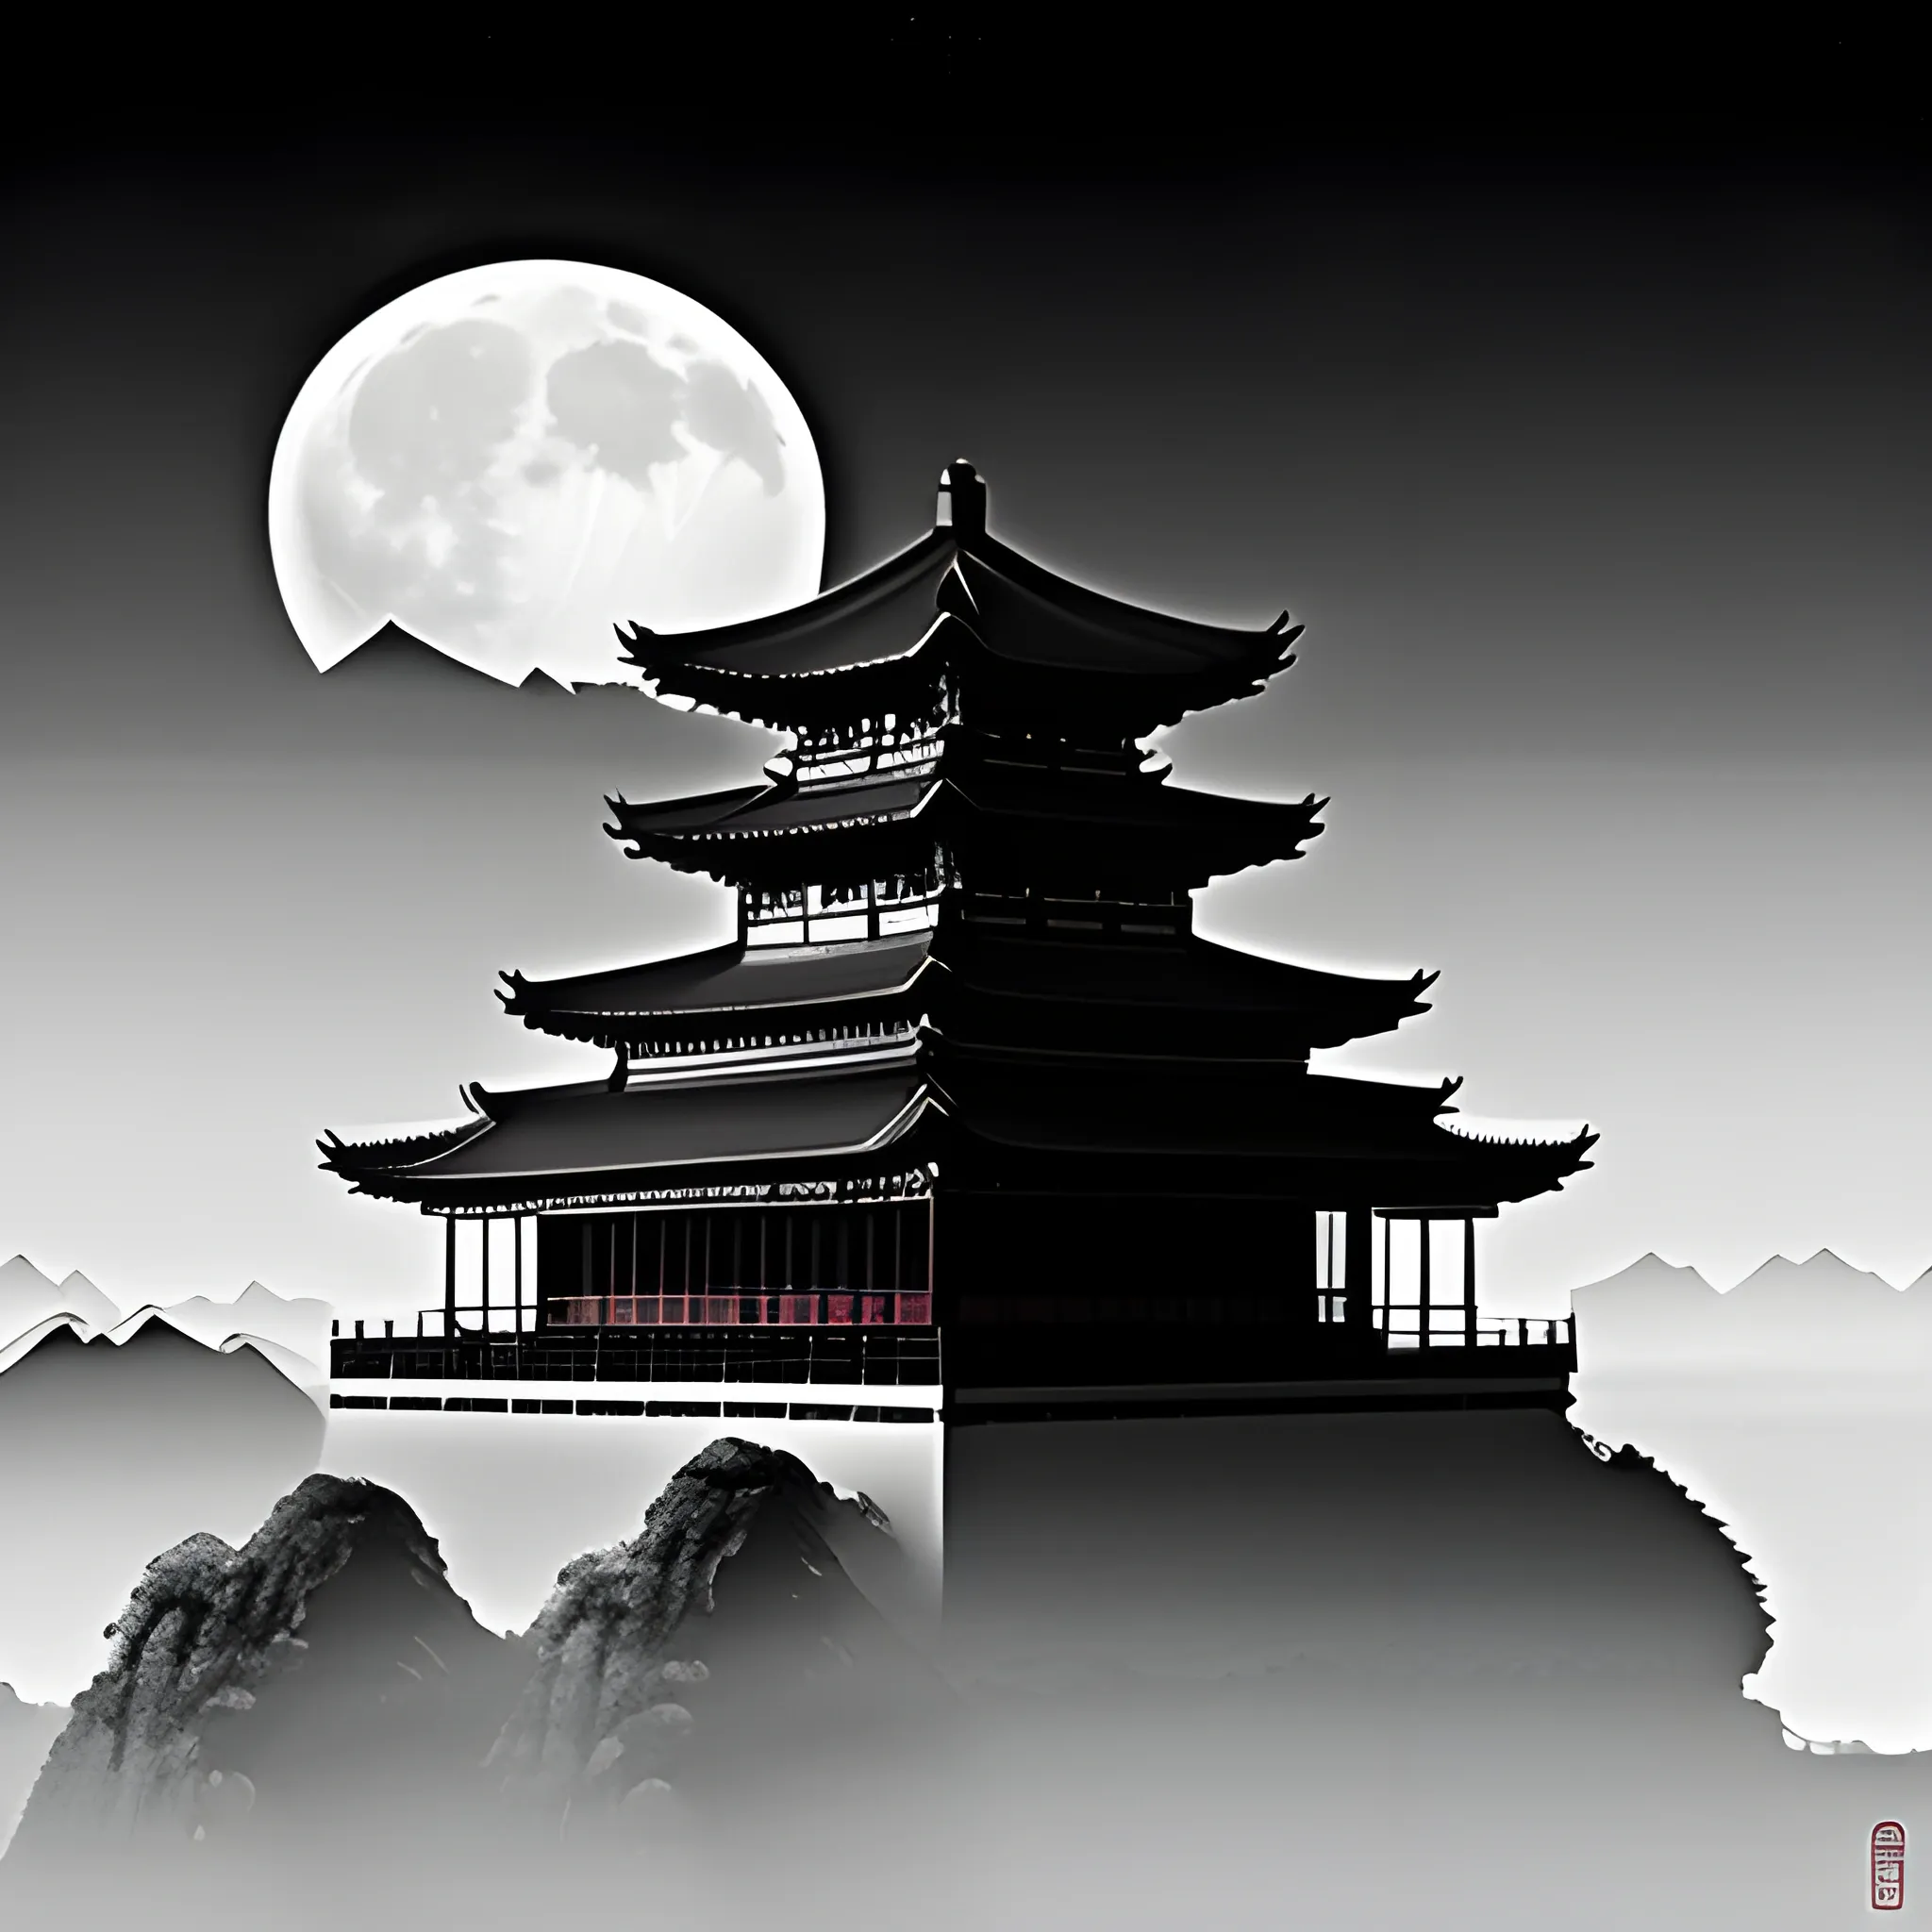 Chinese Guilin mountain silhouette with a tiny pagoda on top of high mountains with fog, a large moon in the top right corner, traditional black and white Chinese brush style, ultra-high details, ultra-high definition in black and white